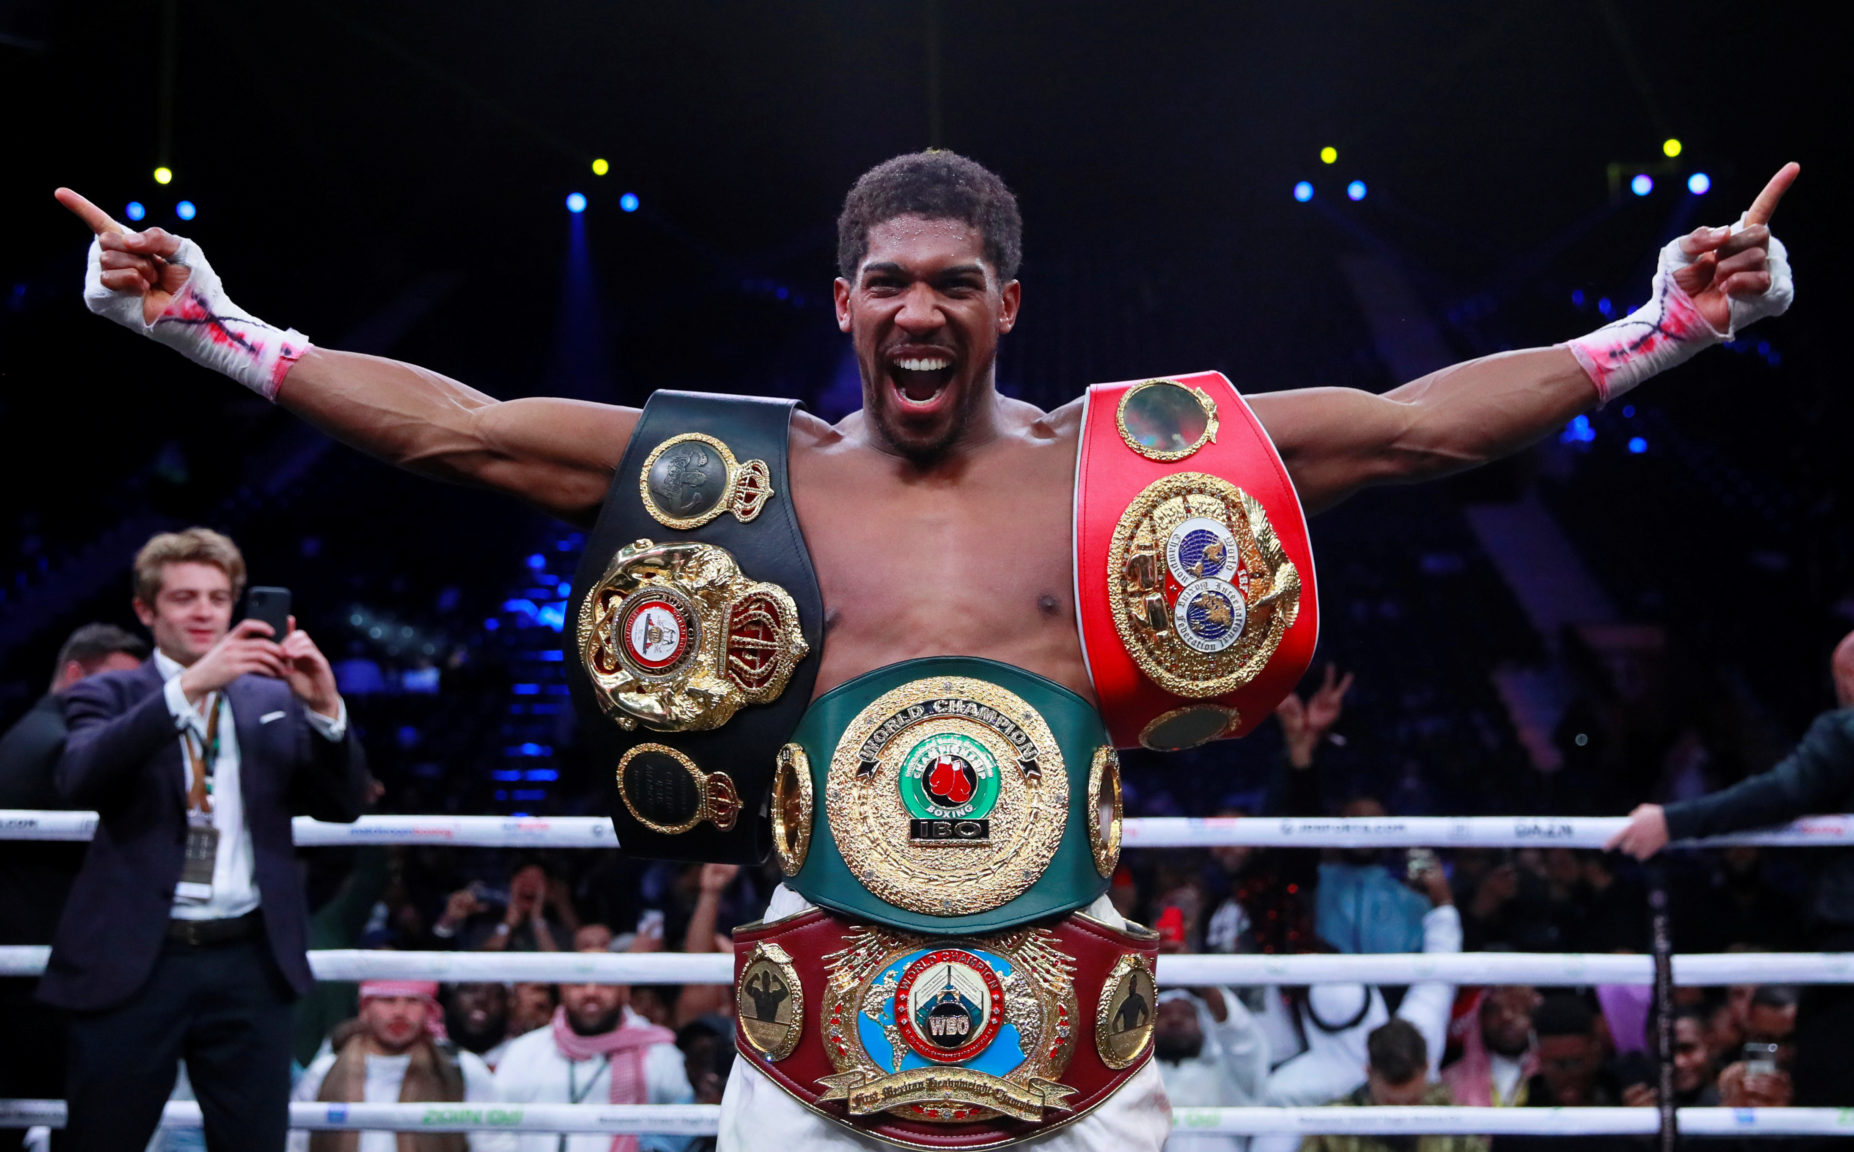 ‘IN 12 WEEKS I GO AGAIN’ – ANTHONY JOSHUA TEASES A BIG SUMMER FIGHT AFTER VICTORY AGAINST JERMAIN FRANKLIN